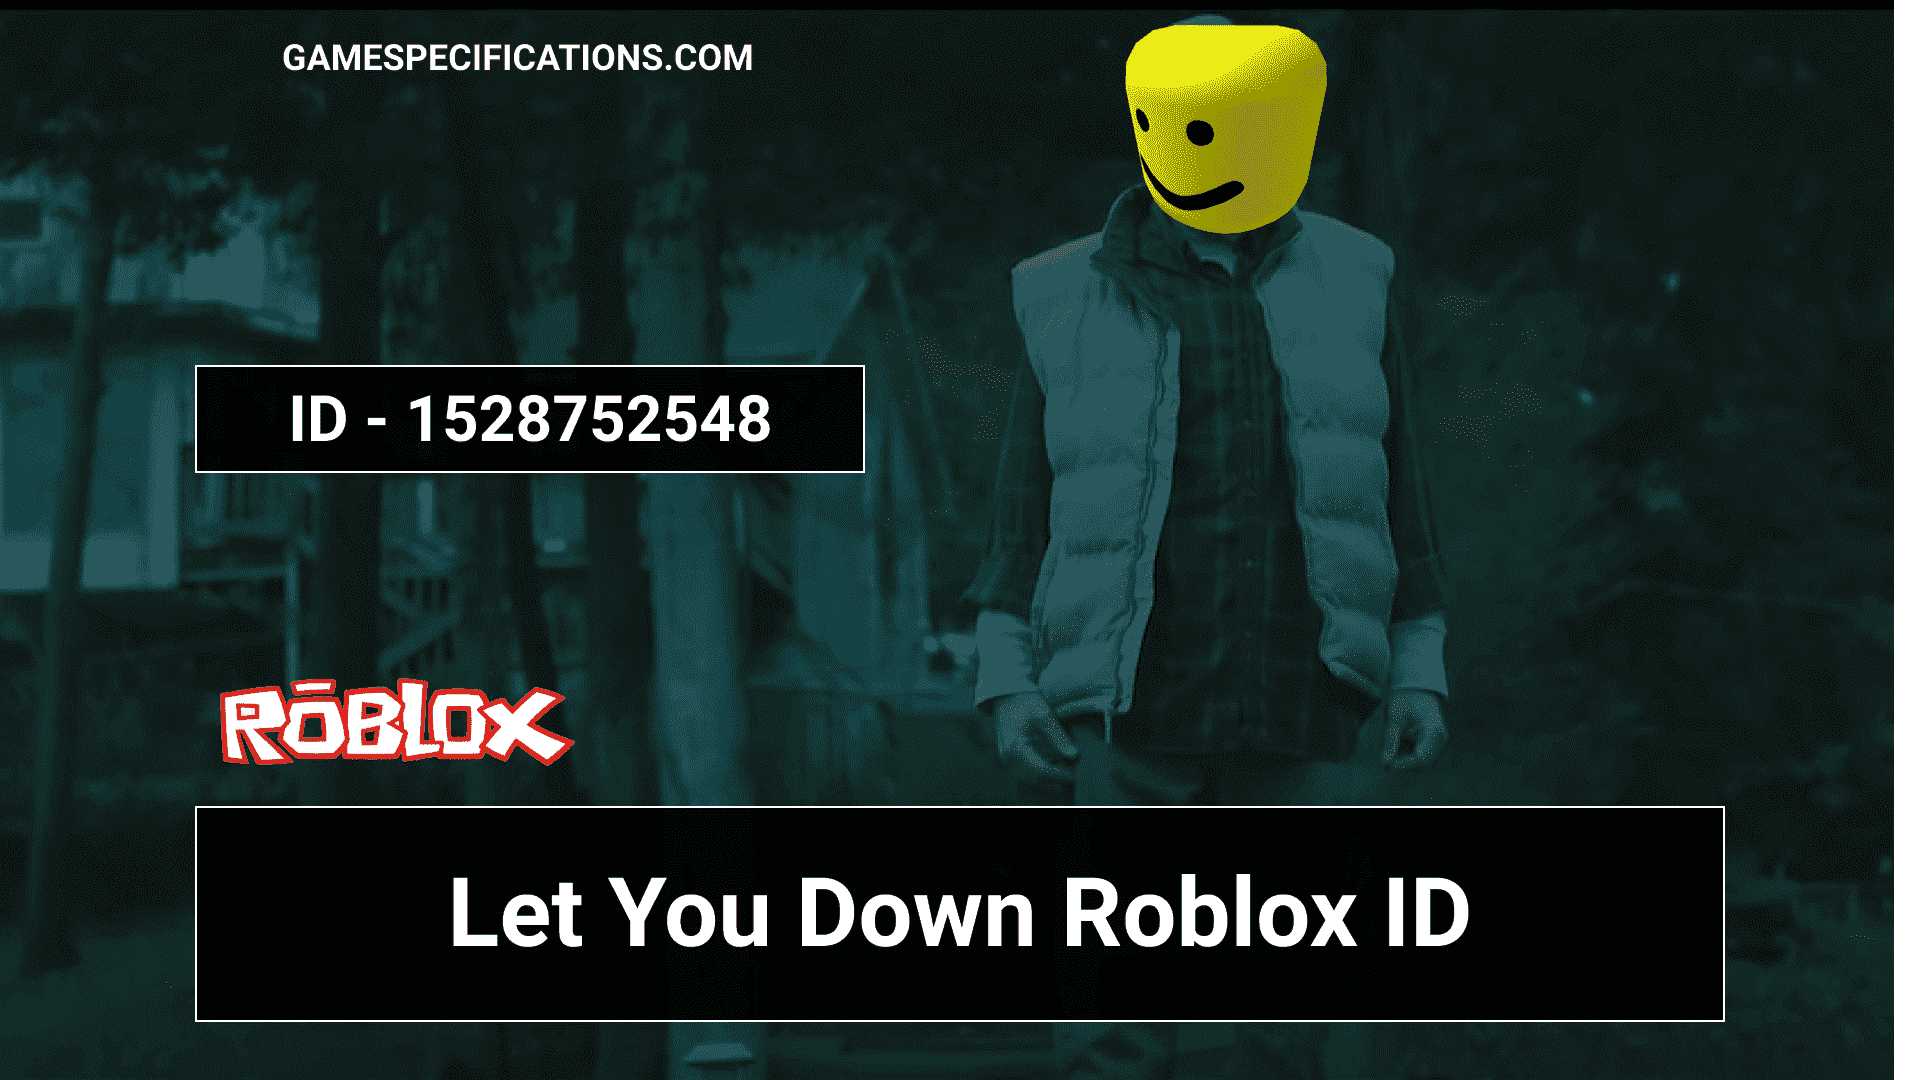 Let You Down Roblox Id Codes To Play The Nf Music 2021 Game Specifications - falling down roblox id code